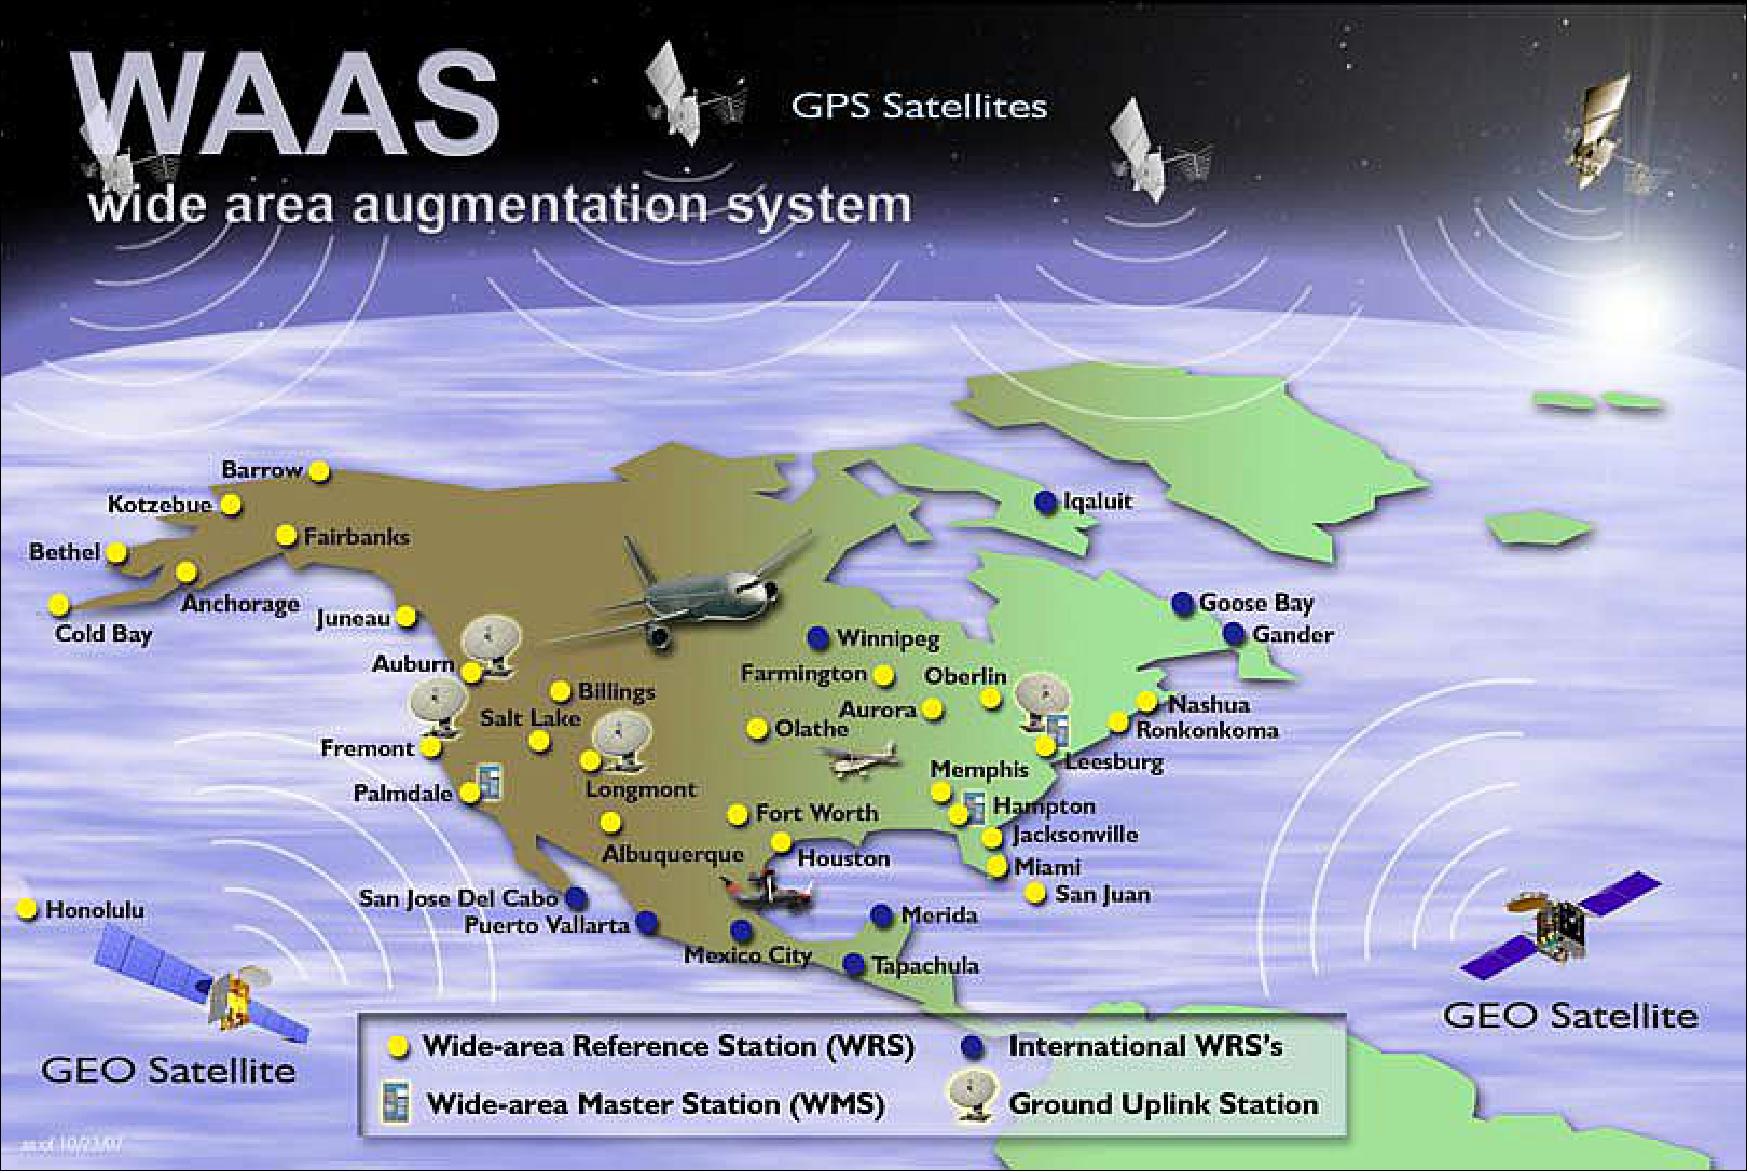 Figure 11: Thirty-eight wide-area reference stations (WRS) are located throughout the U.S., Canada, and Mexico. These stations monitor GPS satellites and collect the data used to create the WAAS signal-in-space which is broadcast by the two WAAS geostationary satellites (image credit: FAA)